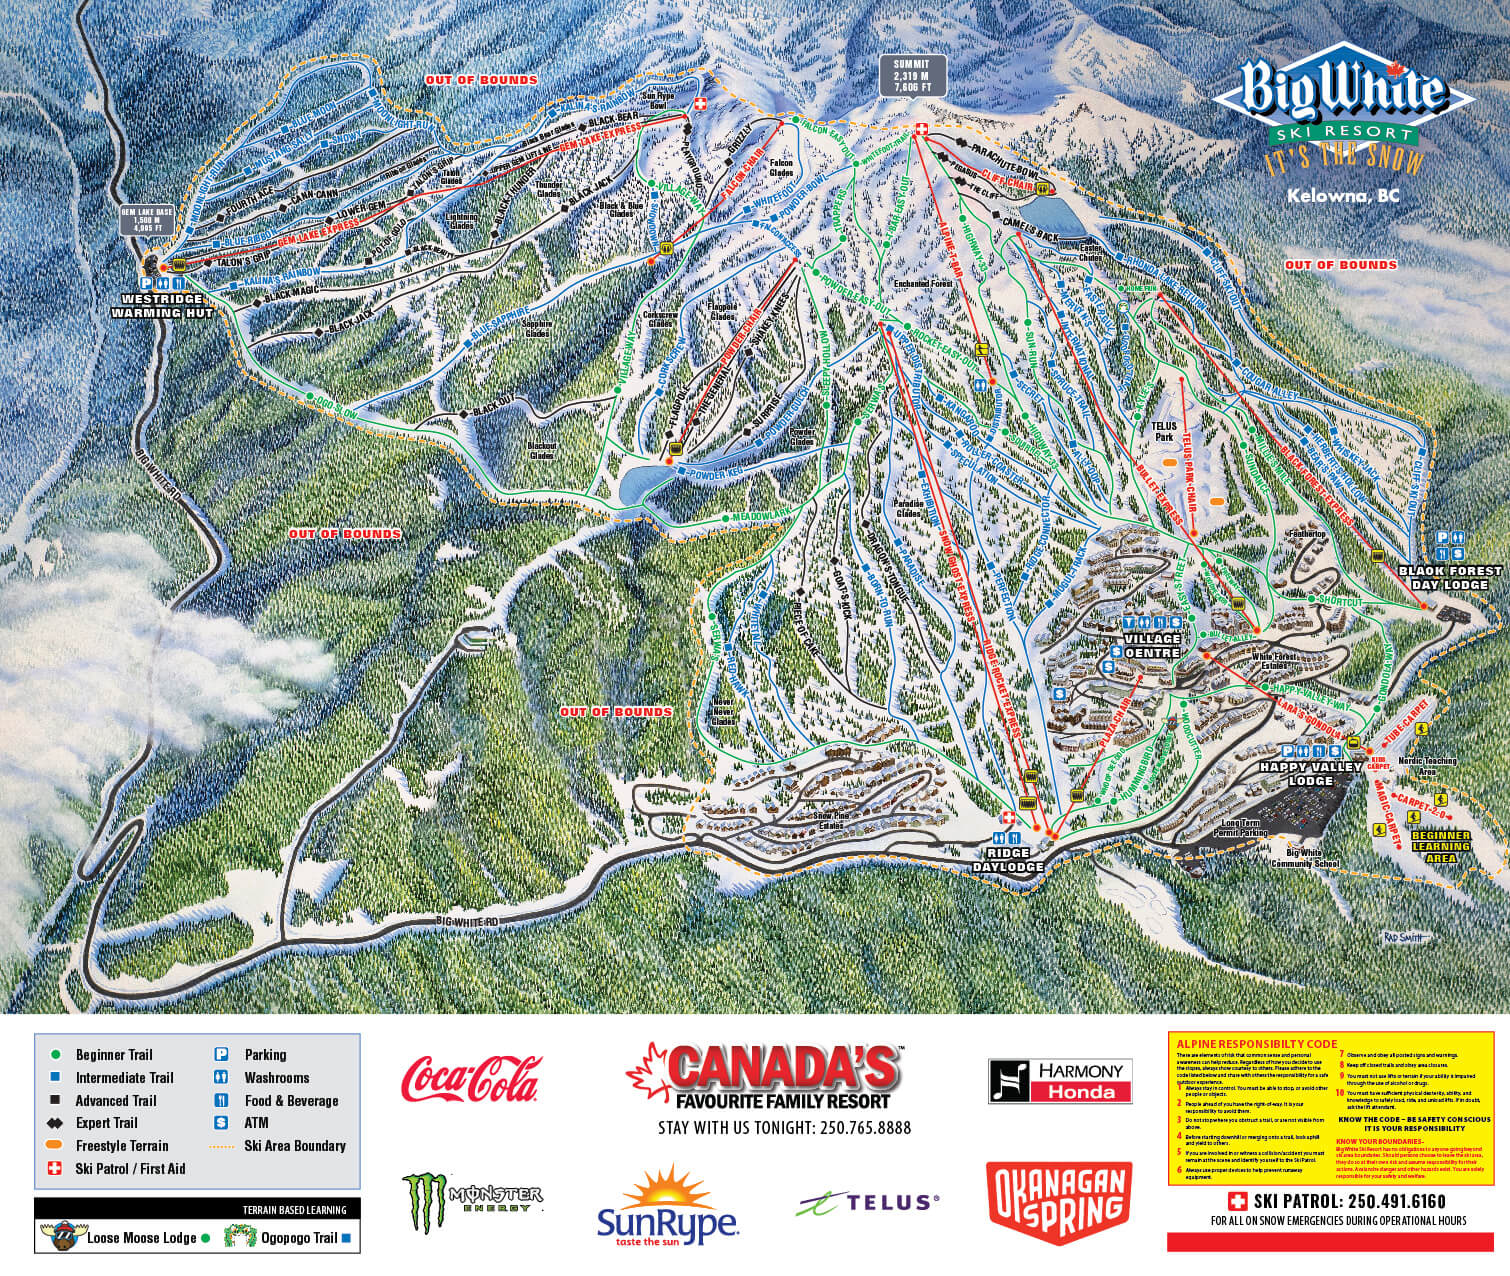 Big White Ski Resort Trail Map, an illustrated map with coloured lines to indicate the different trails on the mountain.